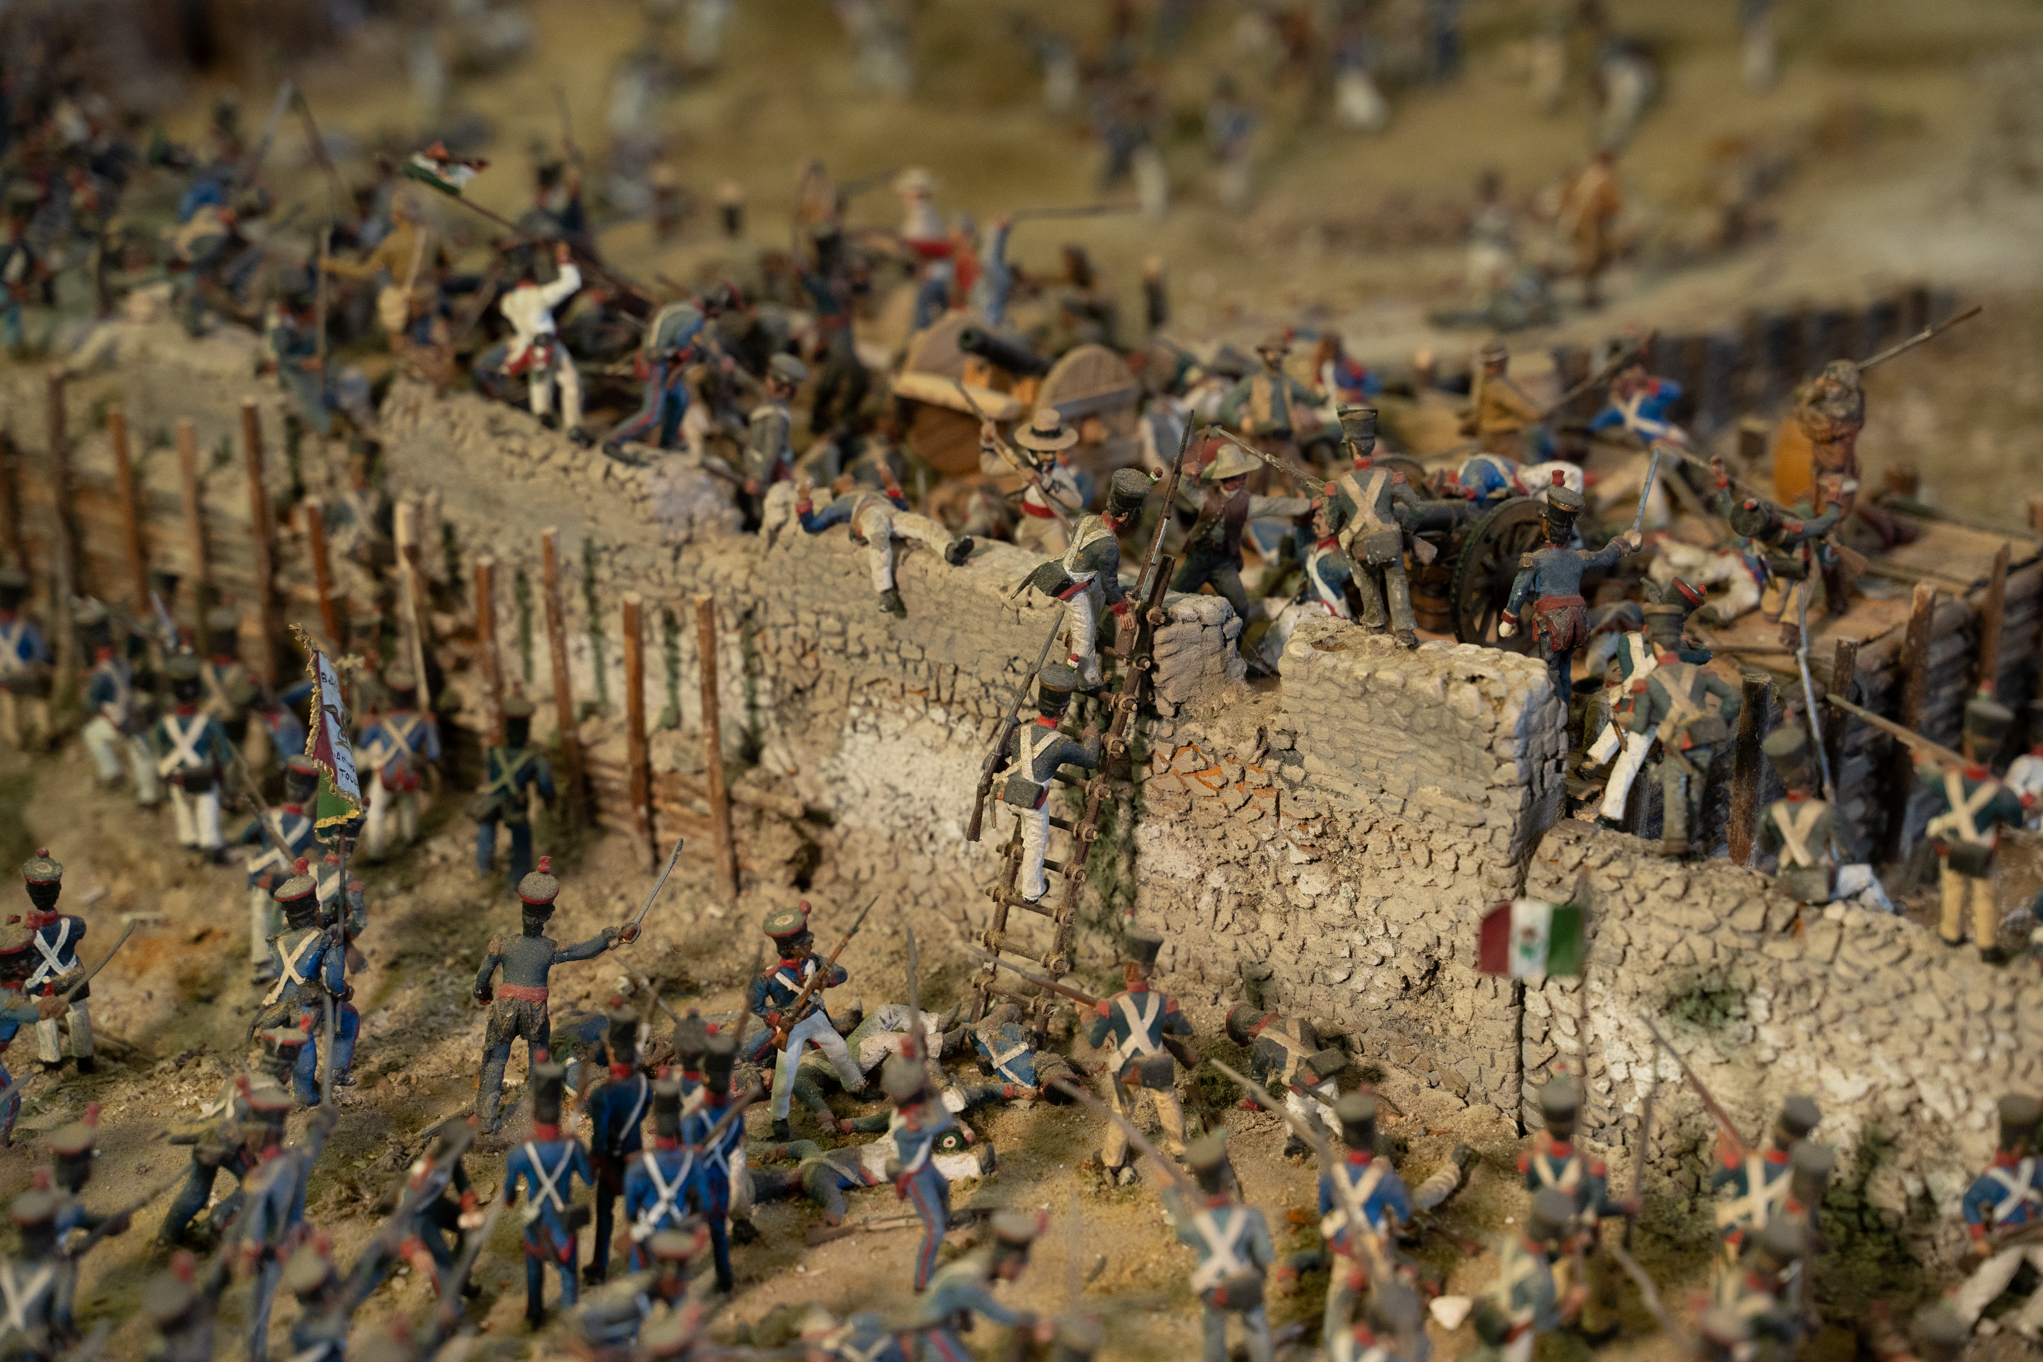 Close-up of the diorama Texas Liberty Forever: The Battle of the Alamo.